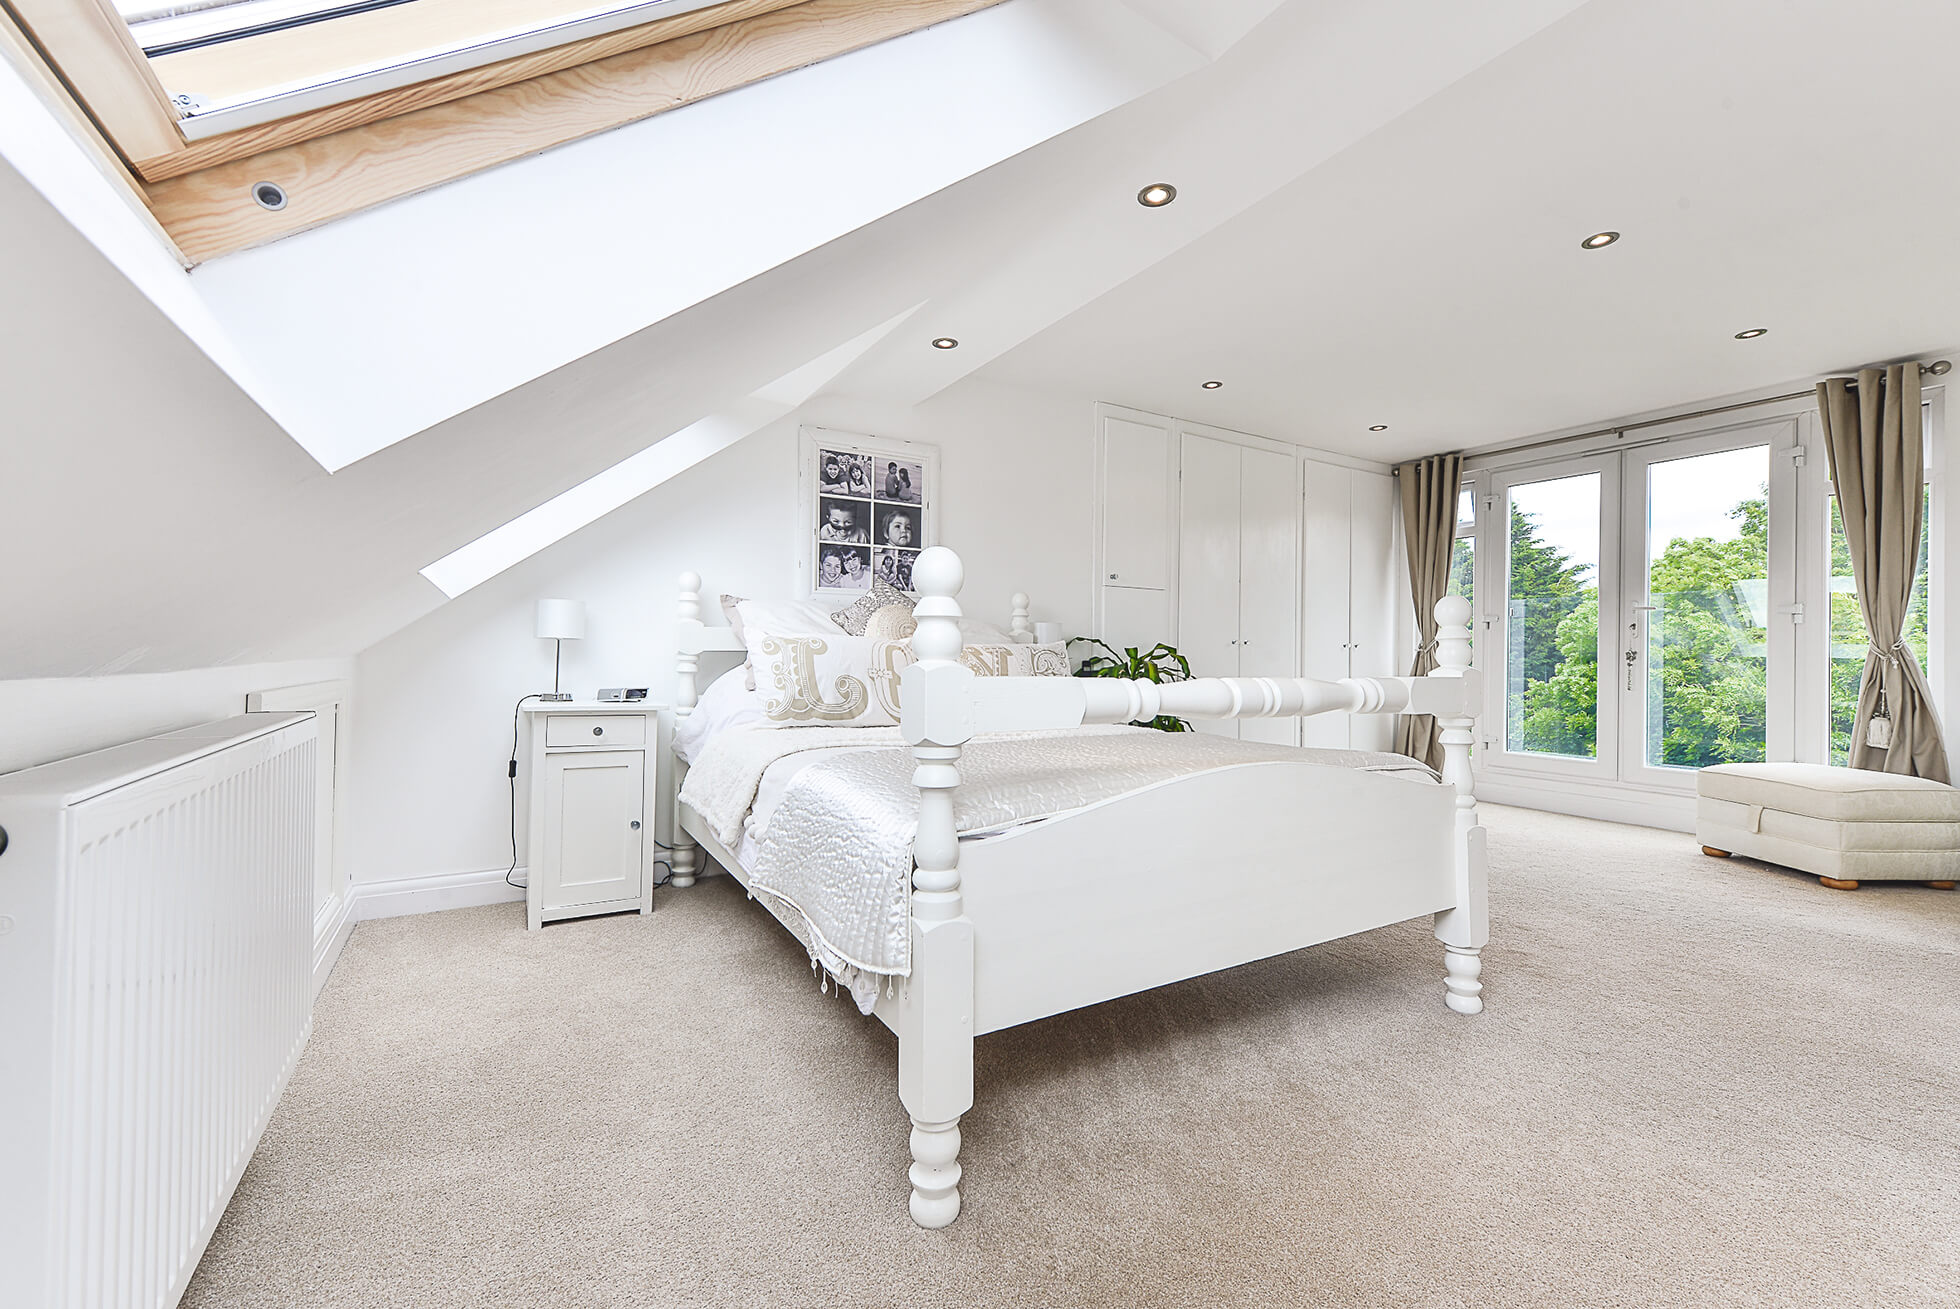 Do you have a question about converting your Loft in Welwyn Garden City? Here are the most popular questions asked by our clients.